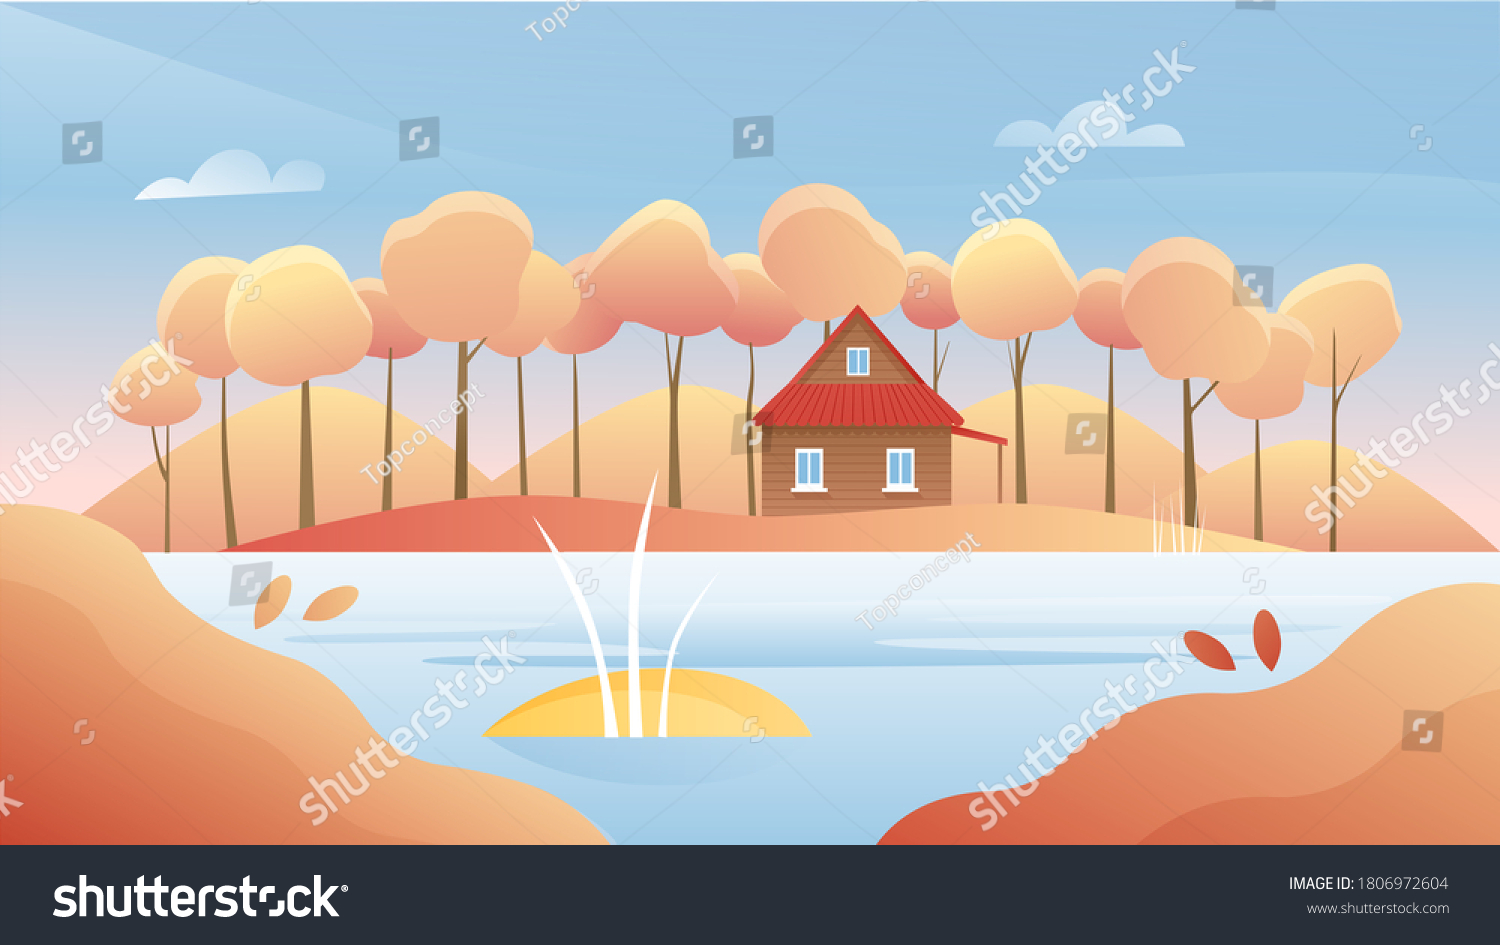 Autumn river landscape vector illustration. Cartoon flat autumnal sunny day, panorama nature woodland scenery with forest trees, rural wooden house on riverbank, fall season scenic woods background #1806972604